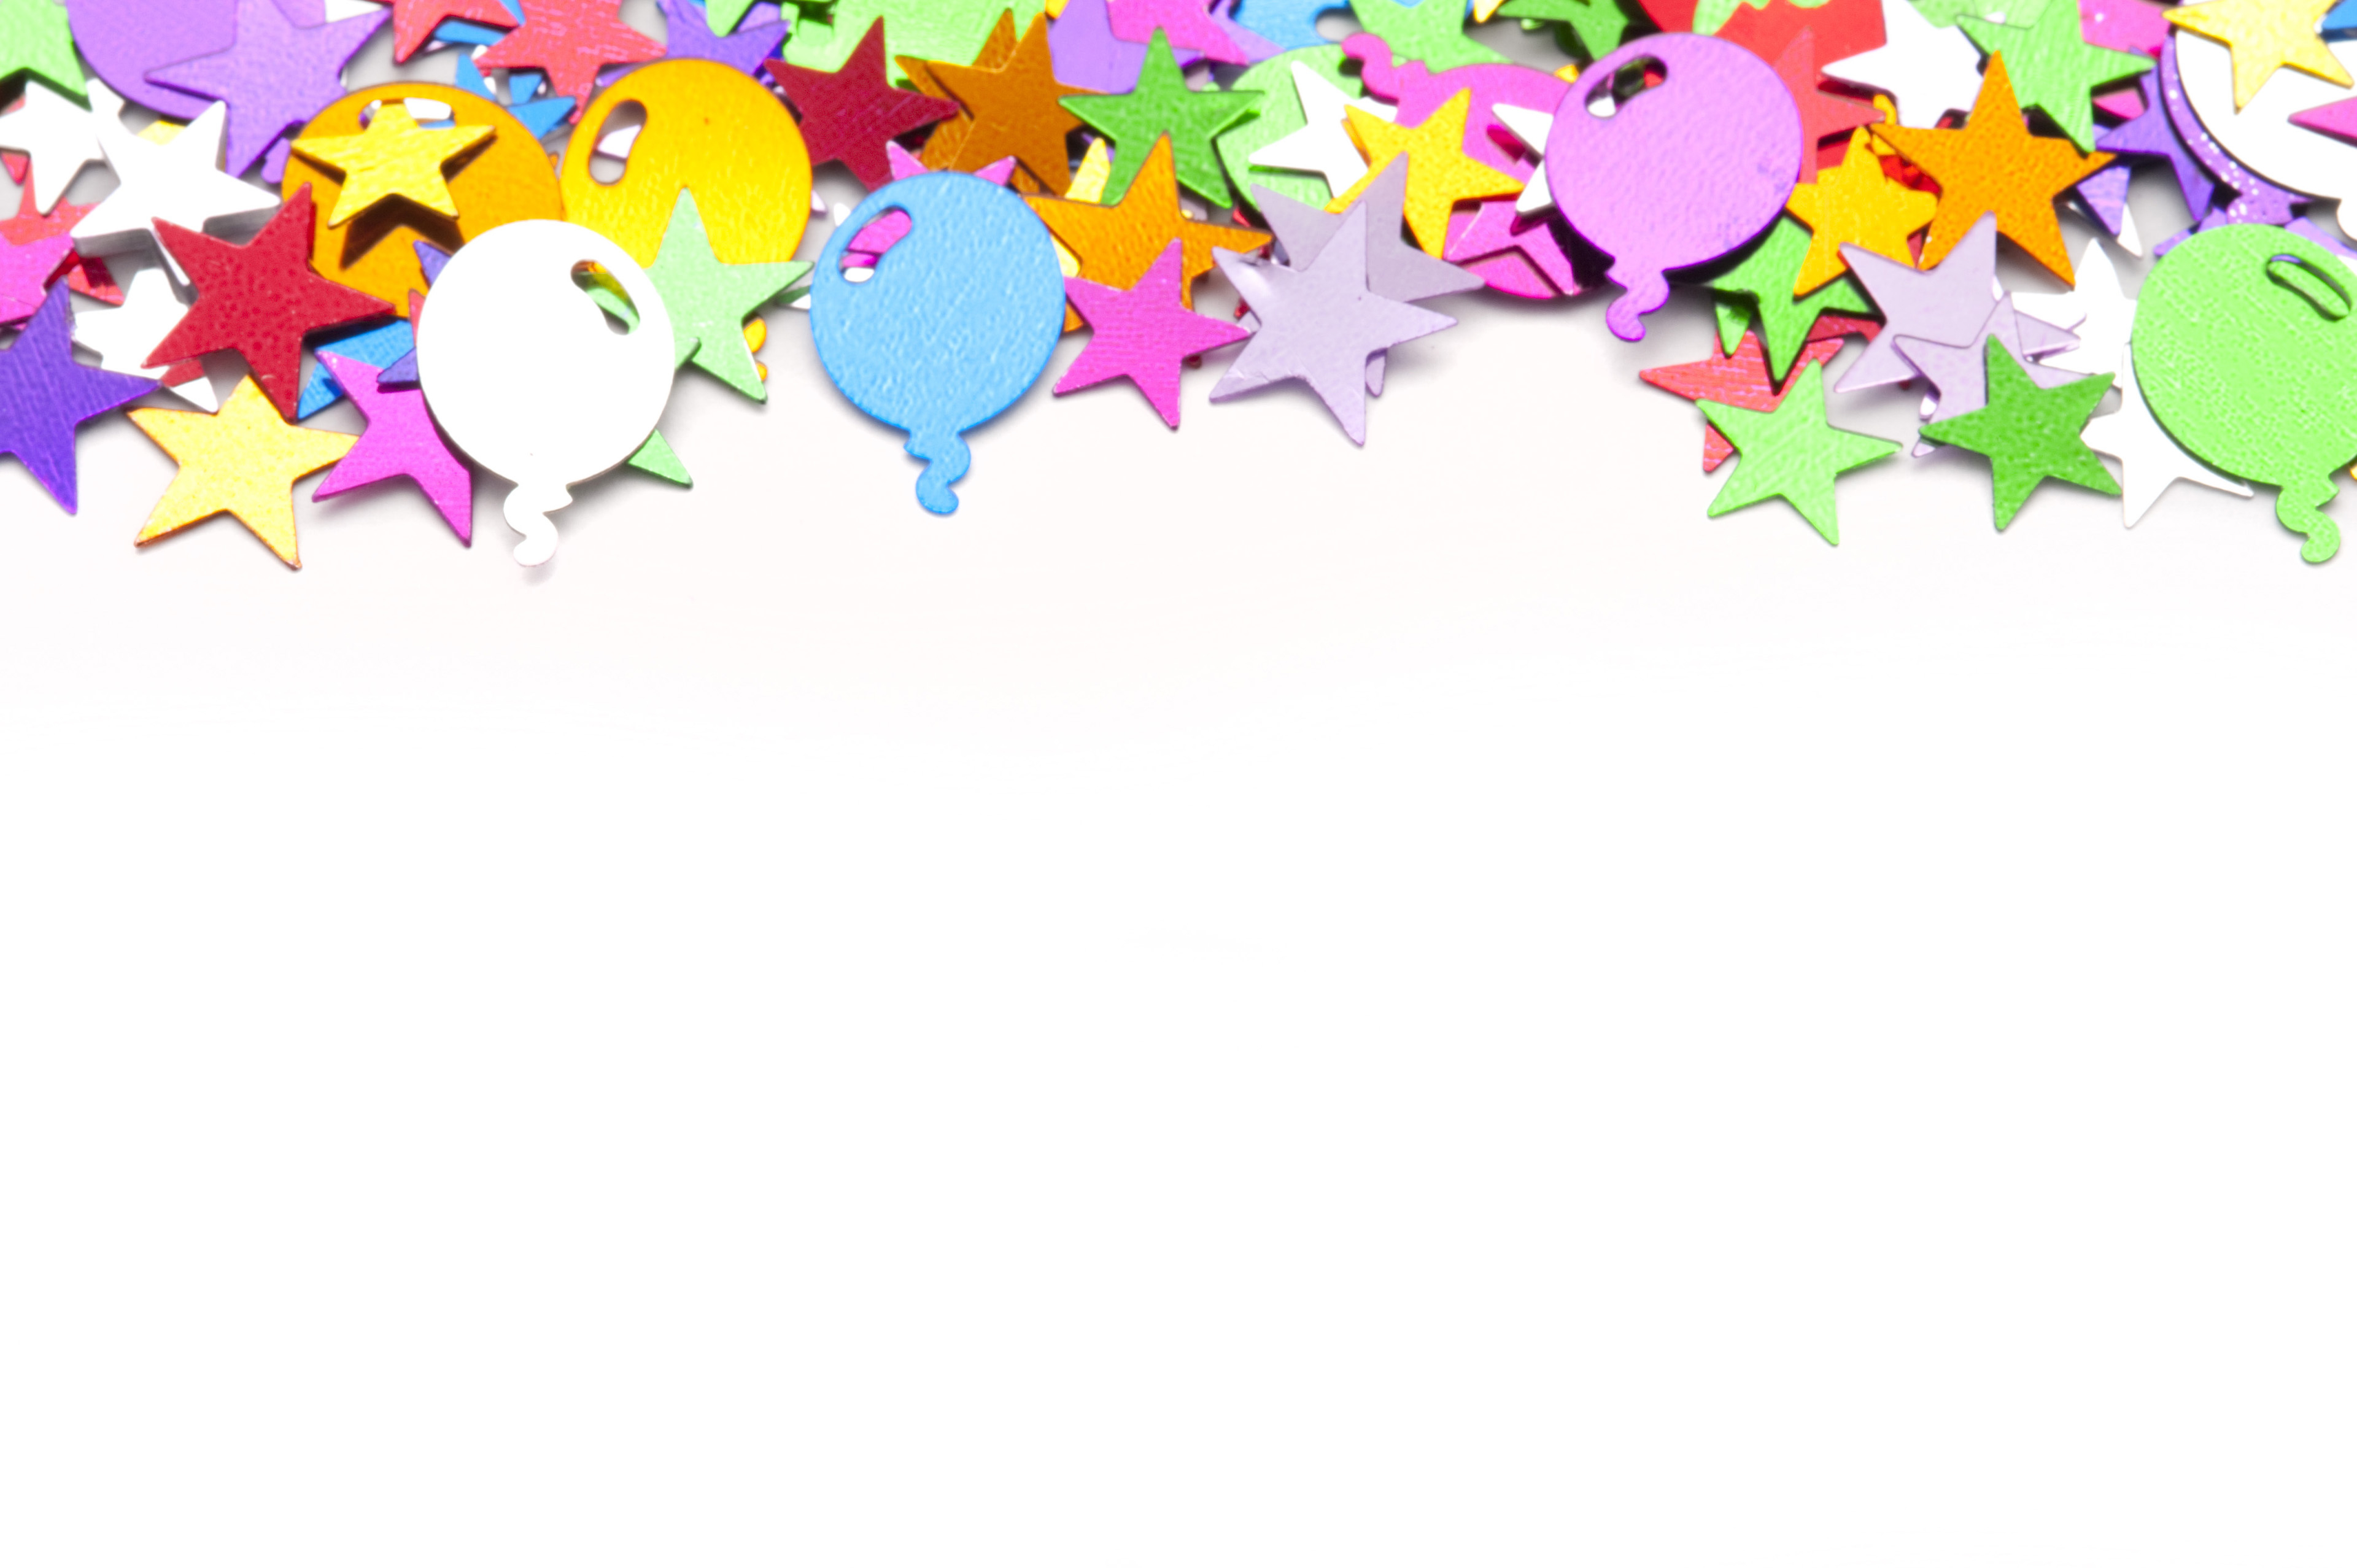 Image Of BirtHDay Party Background With Stars And Balloons